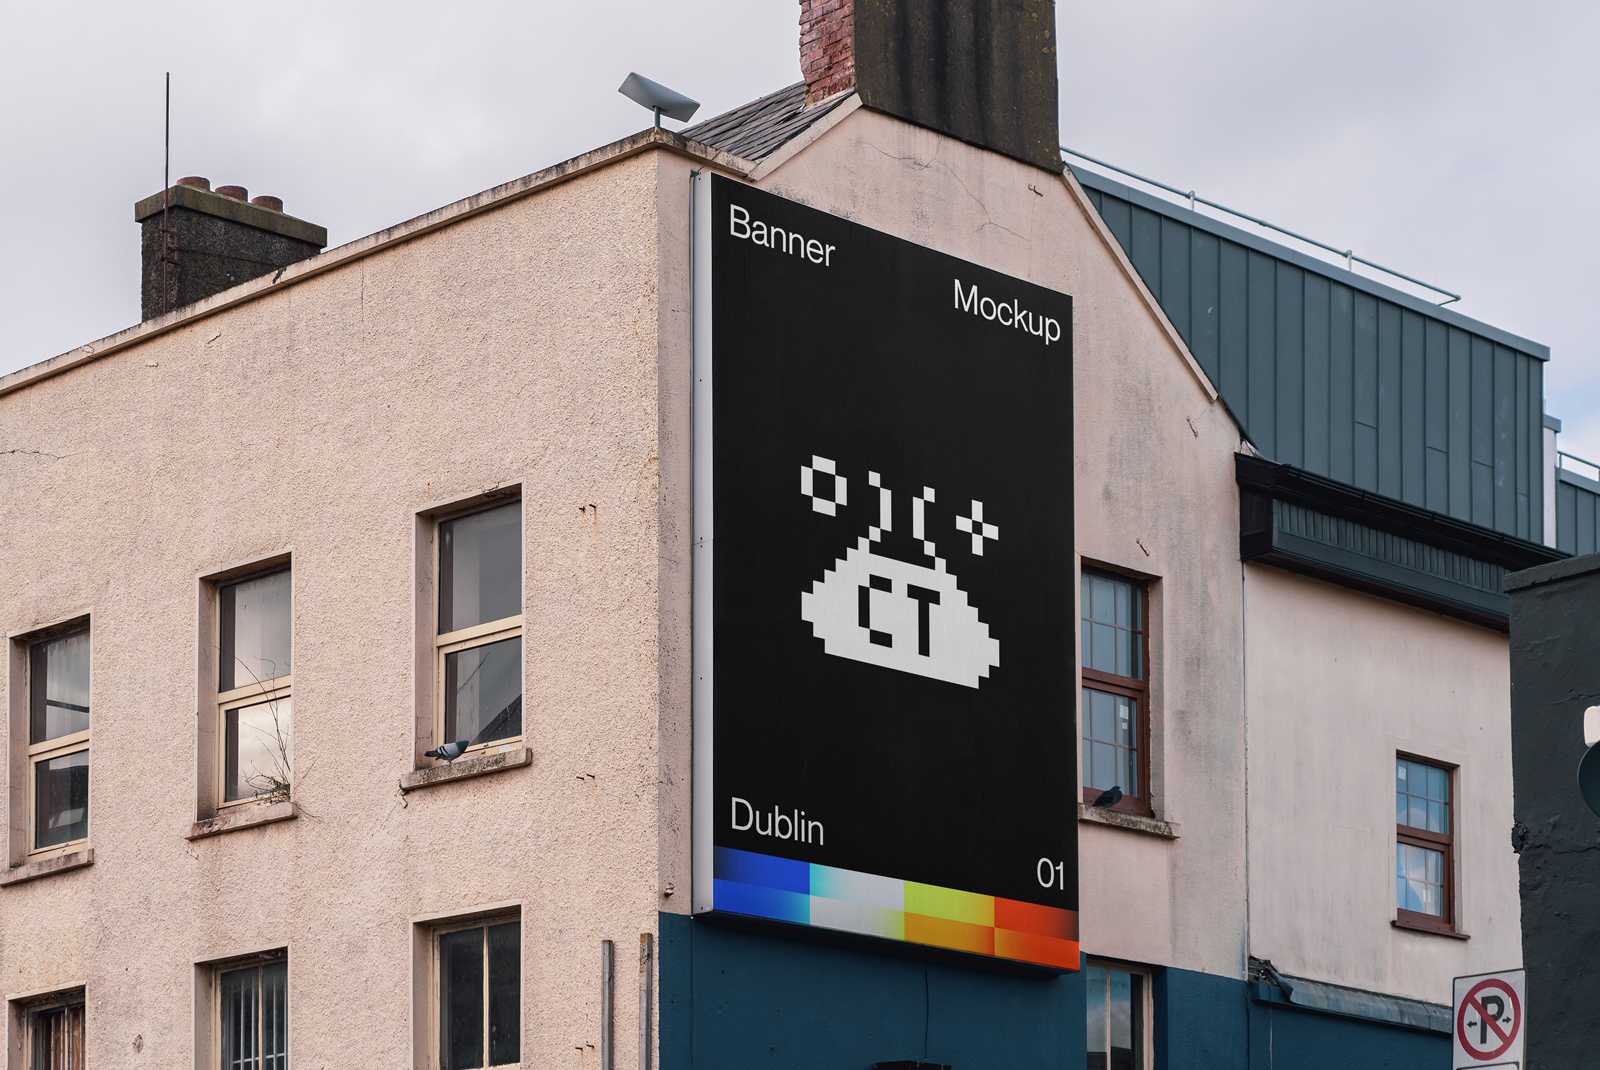 Urban billboard mockup on a building displaying pixel art and text, ideal for graphic design and advertisement presentation.